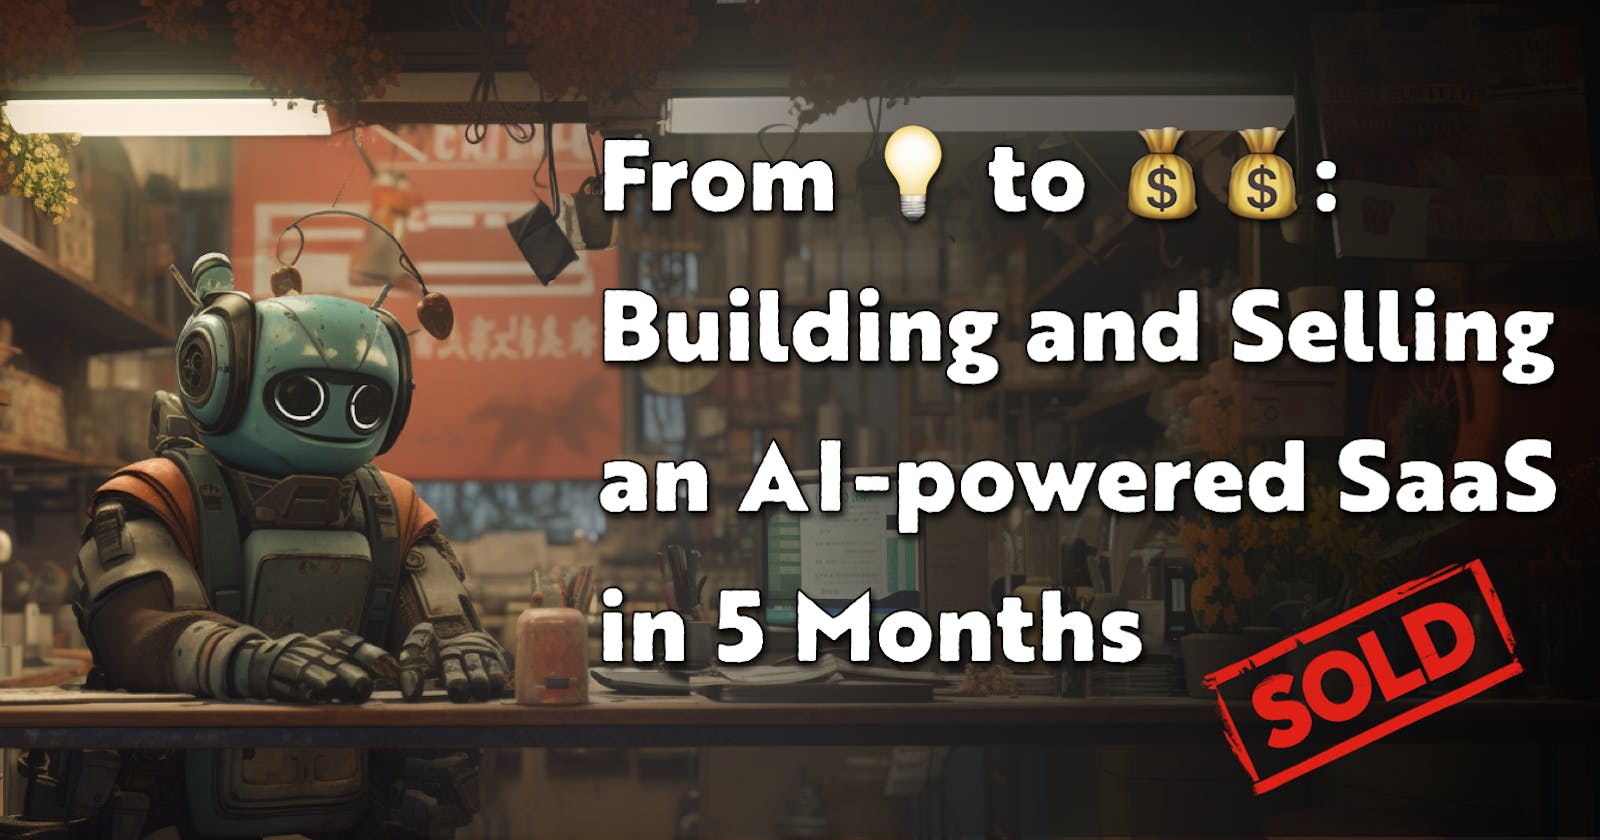 💡From Idea to Exit: Building and Selling an AI-powered SaaS in 5 Months 🤖💰